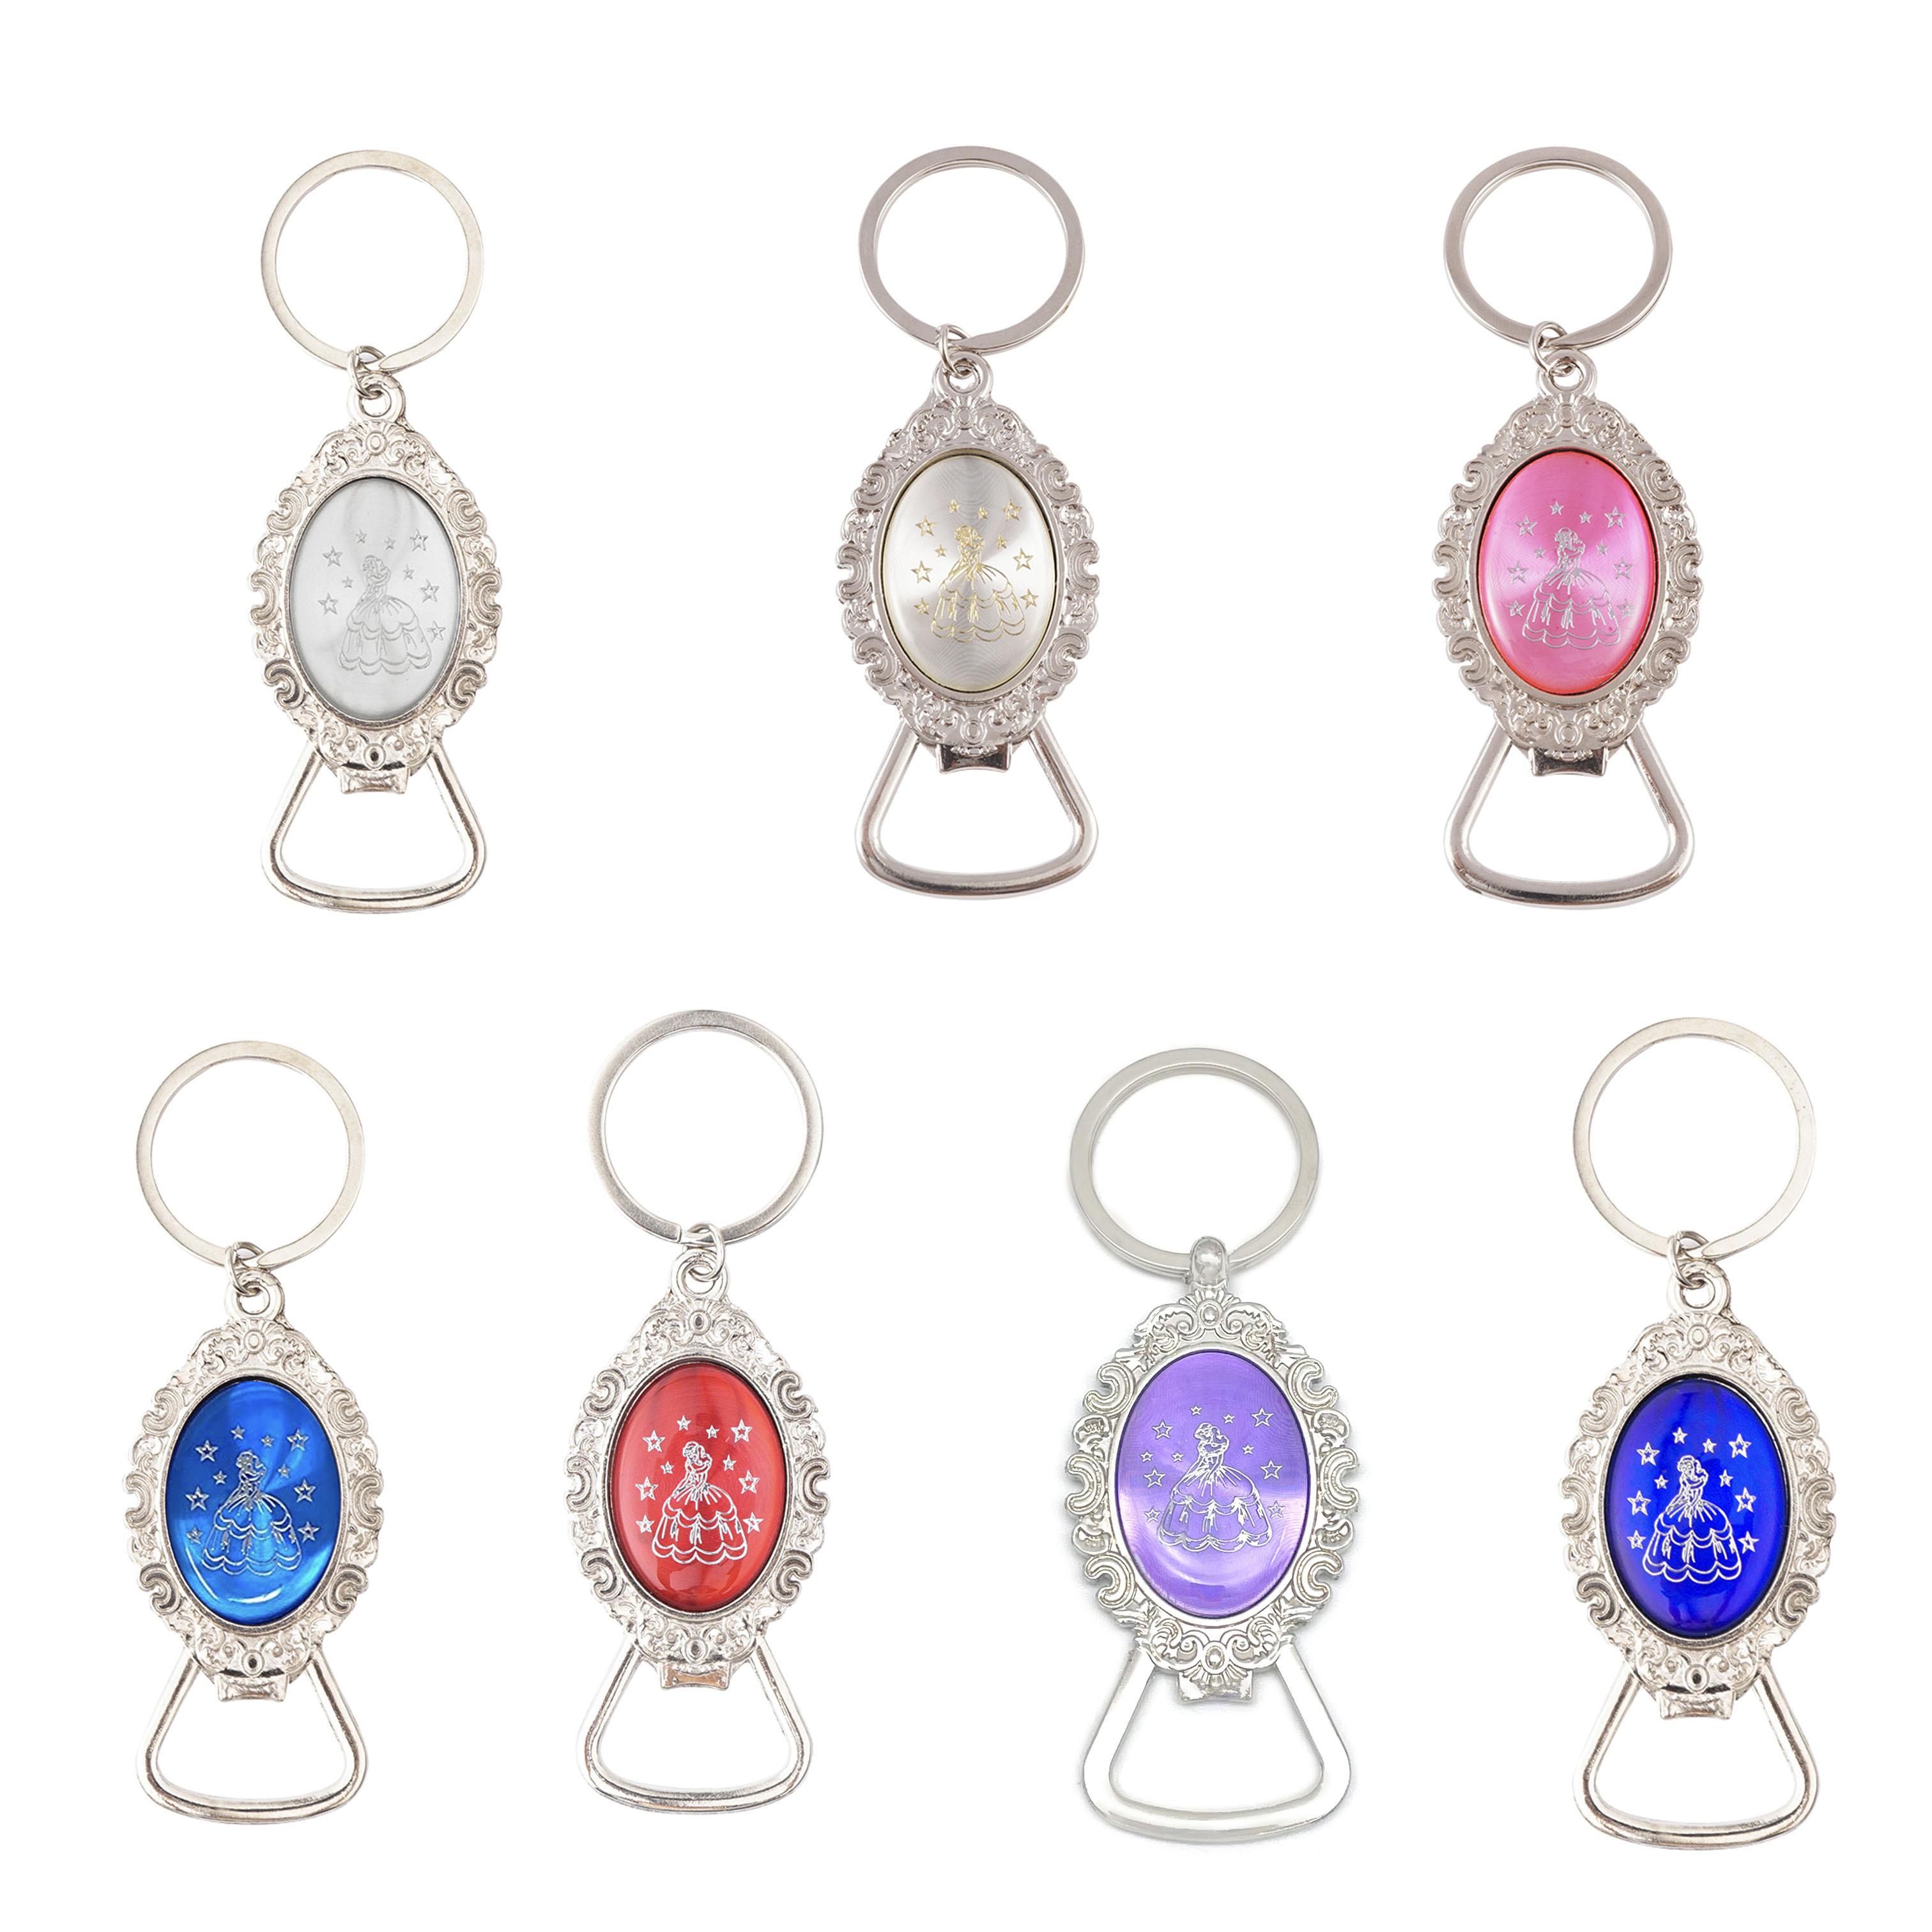 

12pcs Quinceañera Sweet Design Keychain Oval Shaped With Star Deco For Women For Party Favors